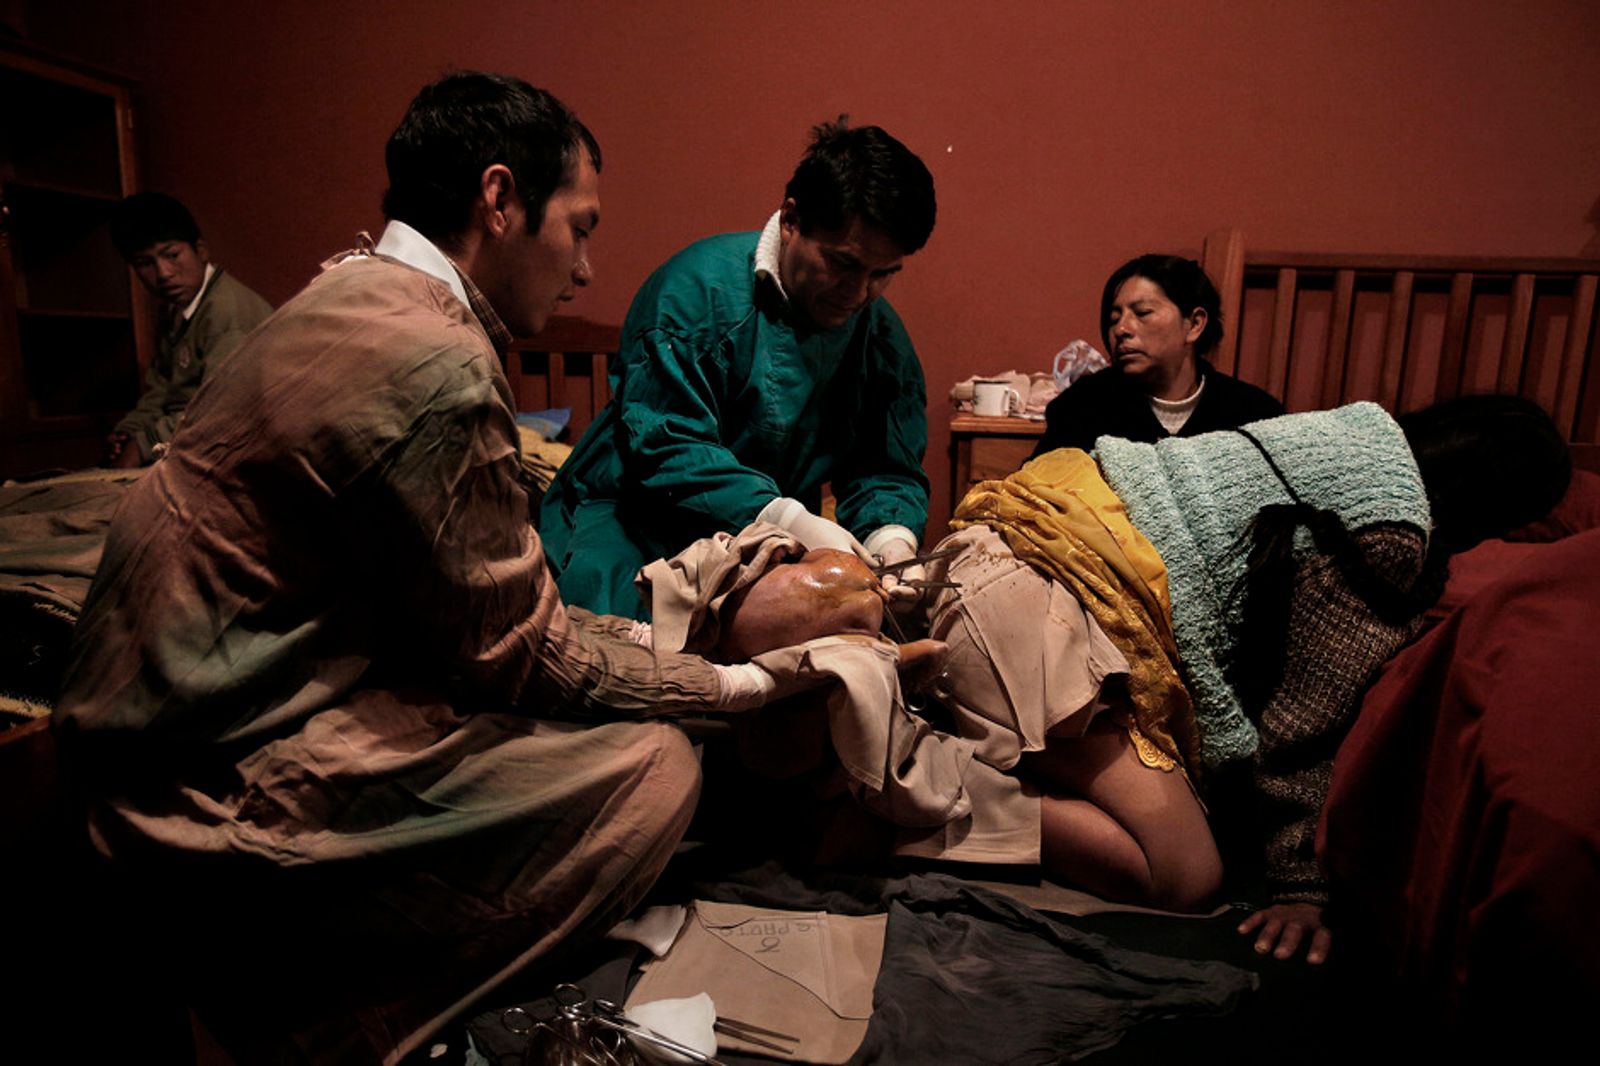 © Olmo Calvo - Image from the Aymara´s births in Patacamaya photography project